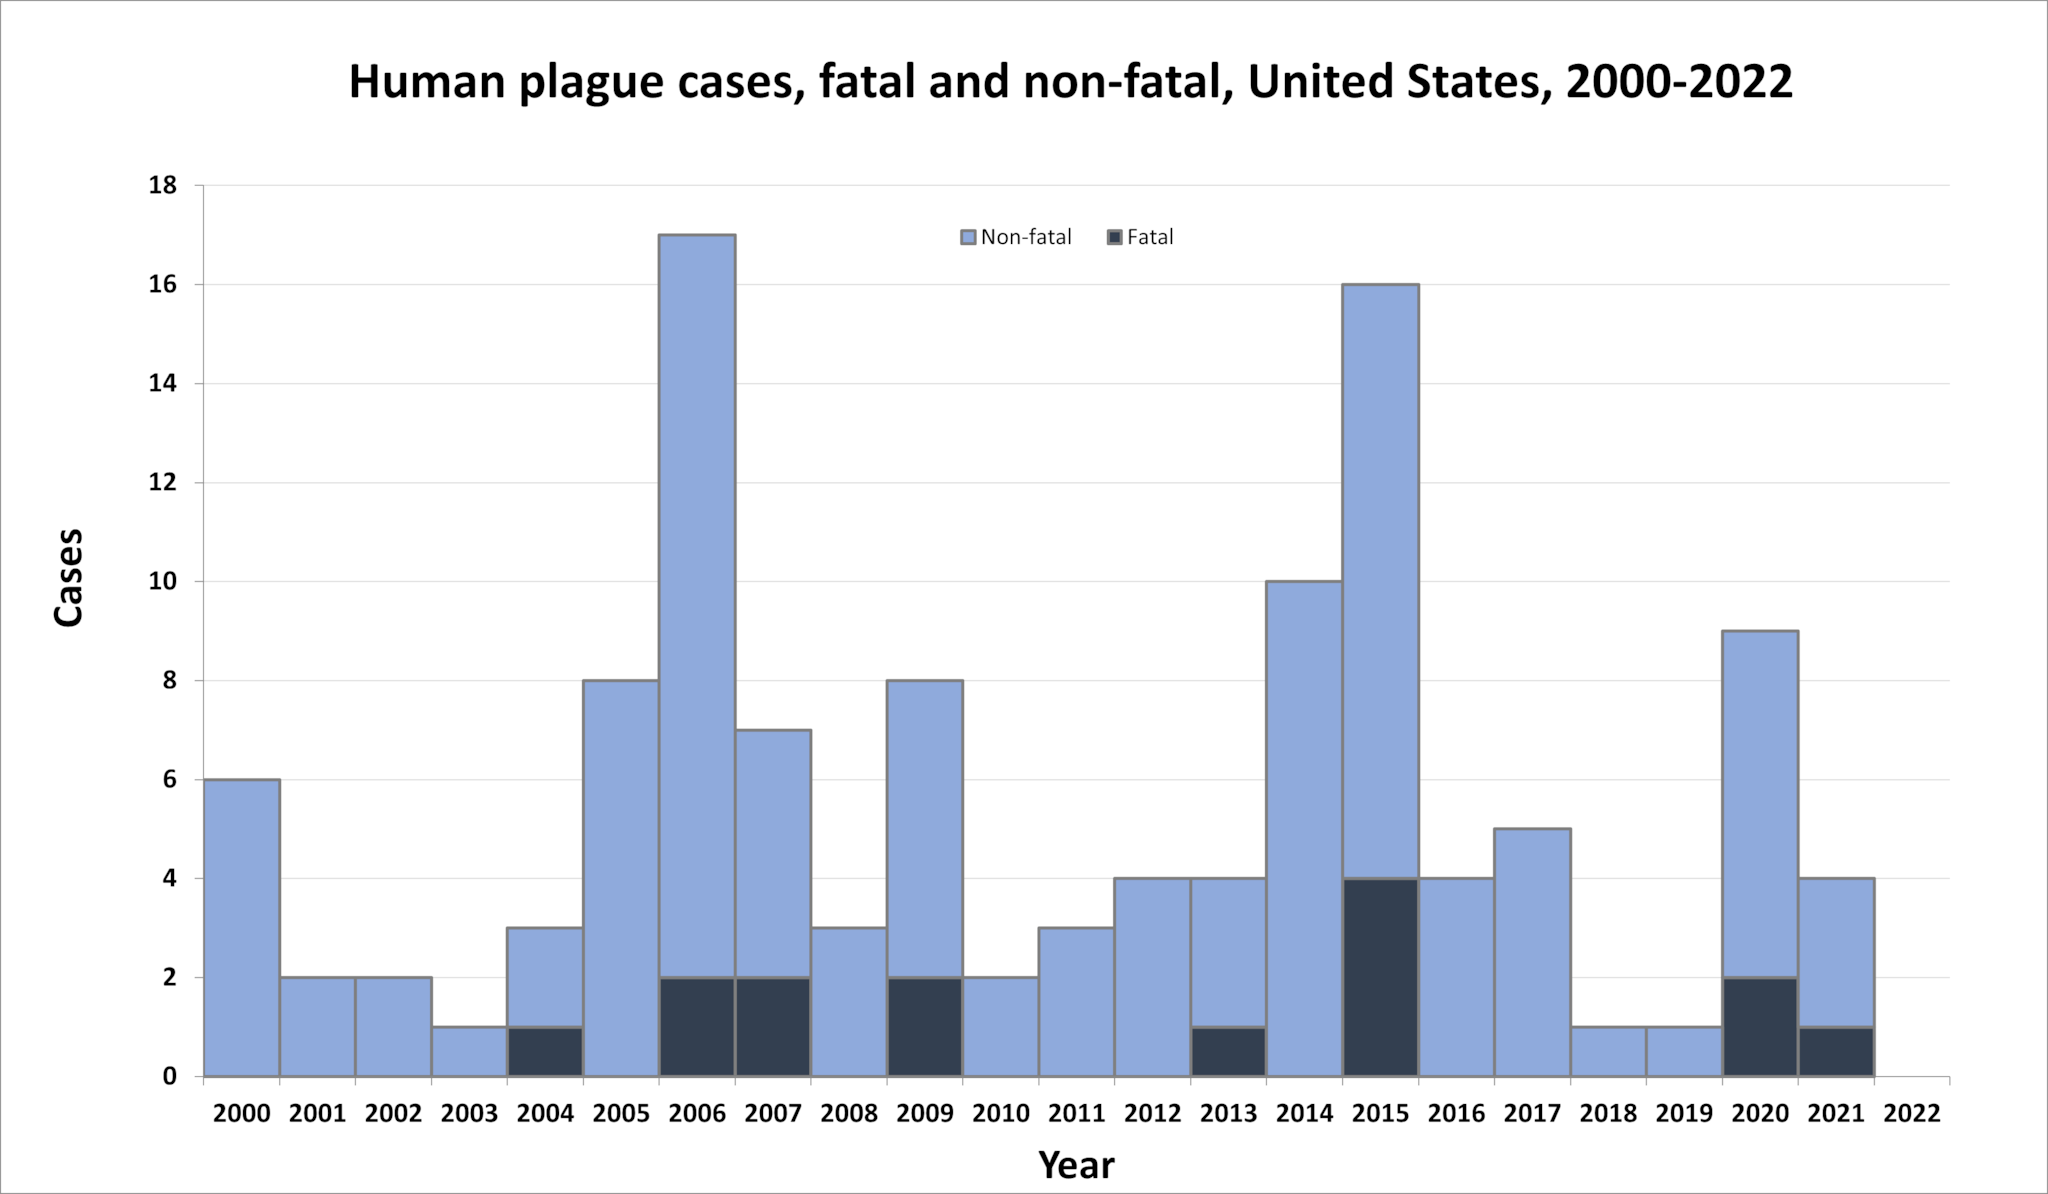 Human plague cases, fatal and non-fatal, United States, 2000-2022.